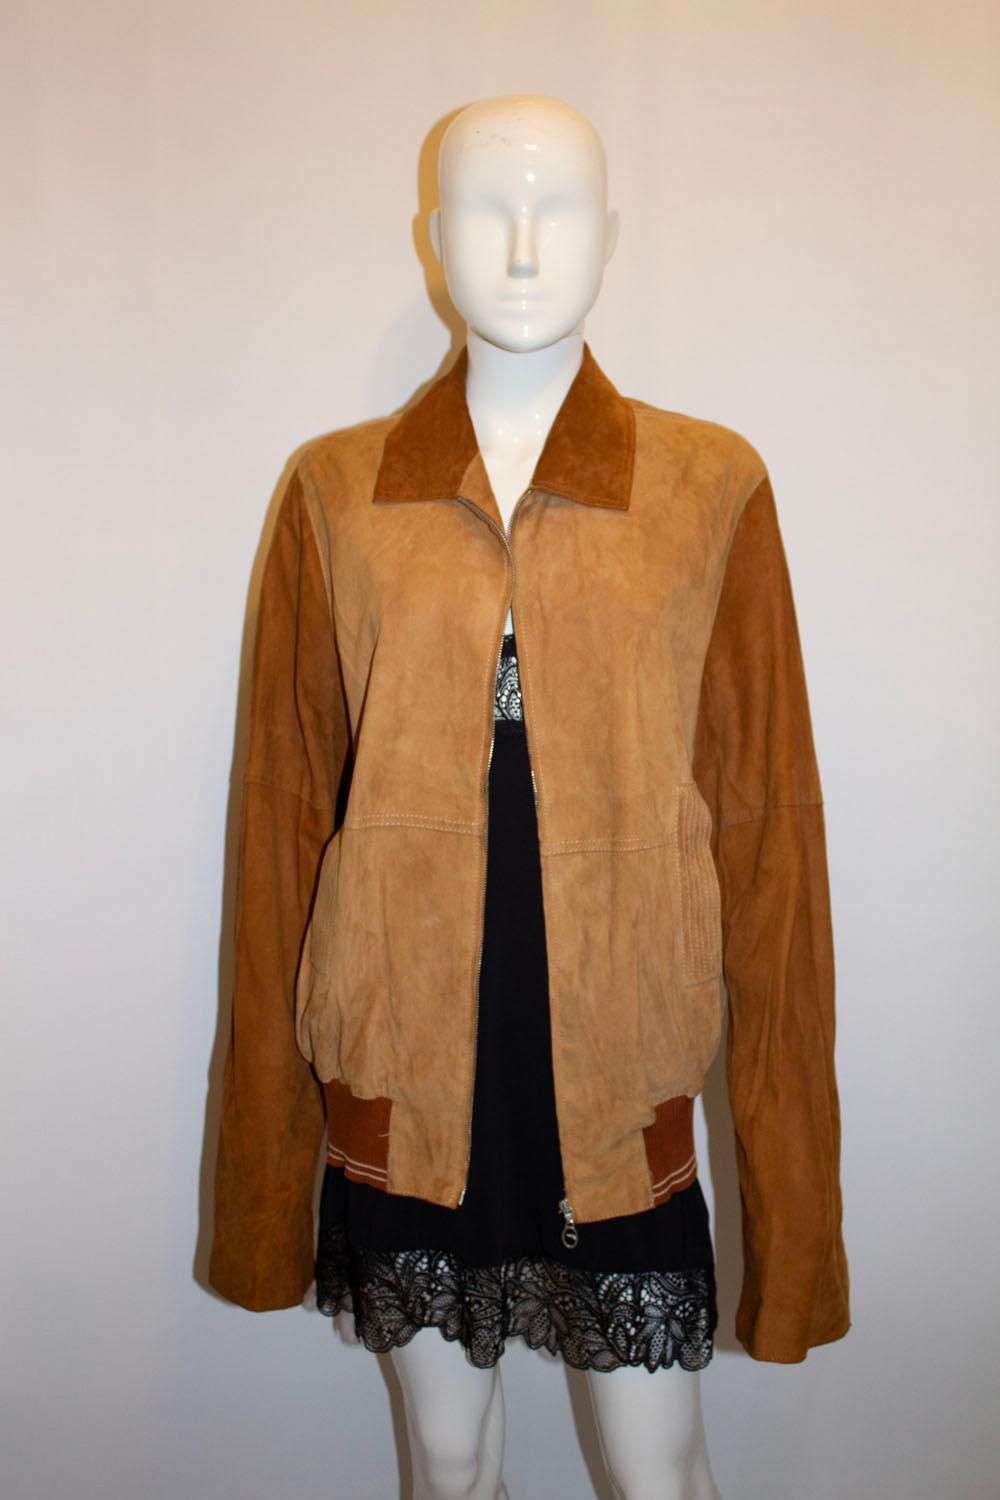 Trussardi Suede Jacket In Good Condition For Sale In London, GB